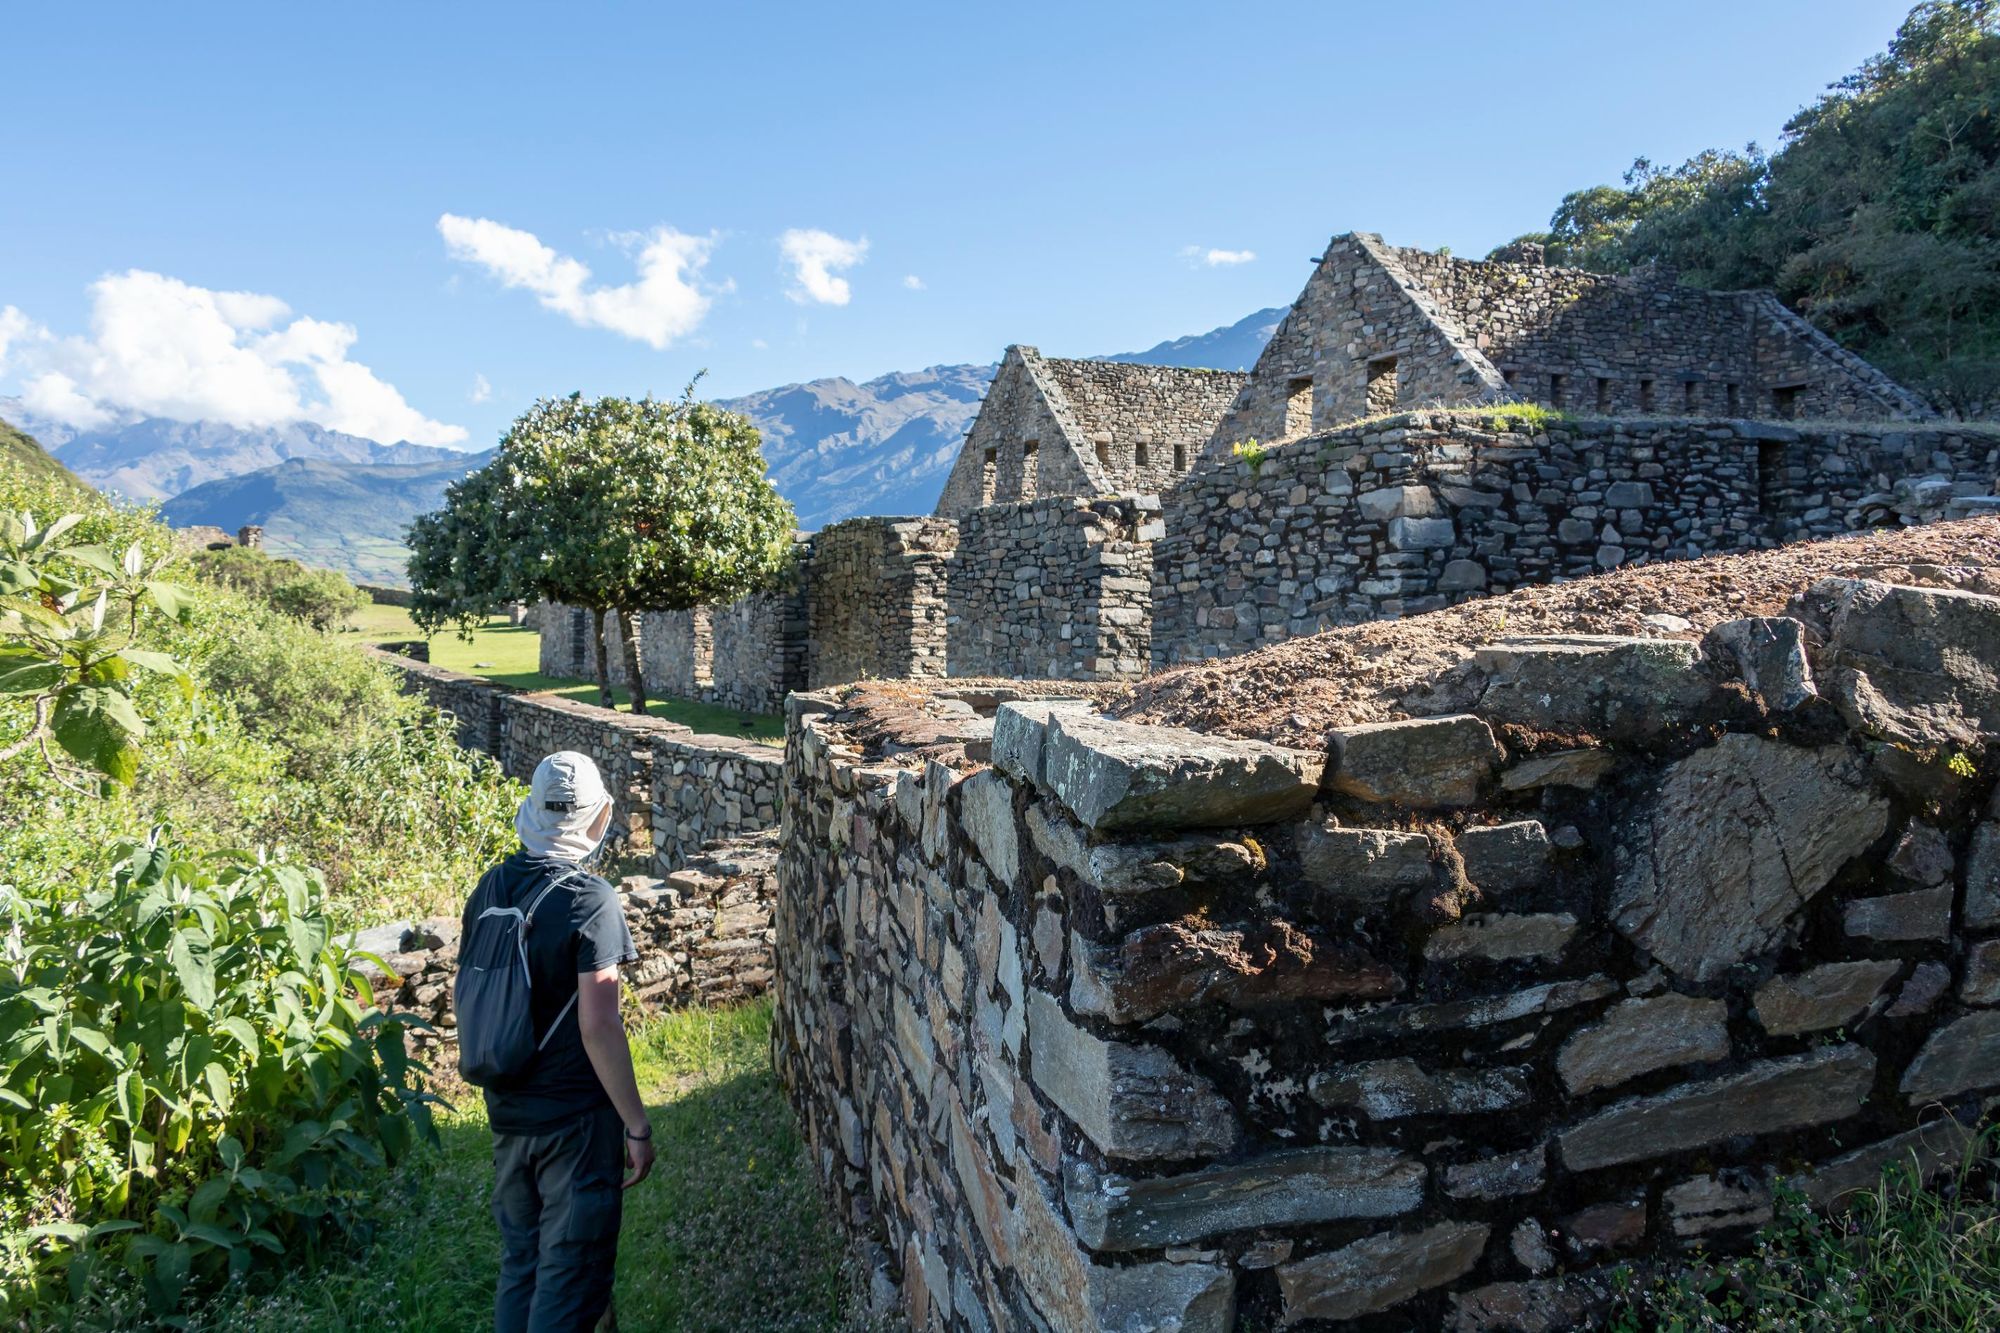 Exploring the site of Choquequirao, with no other visitors in site. Photo: Getty